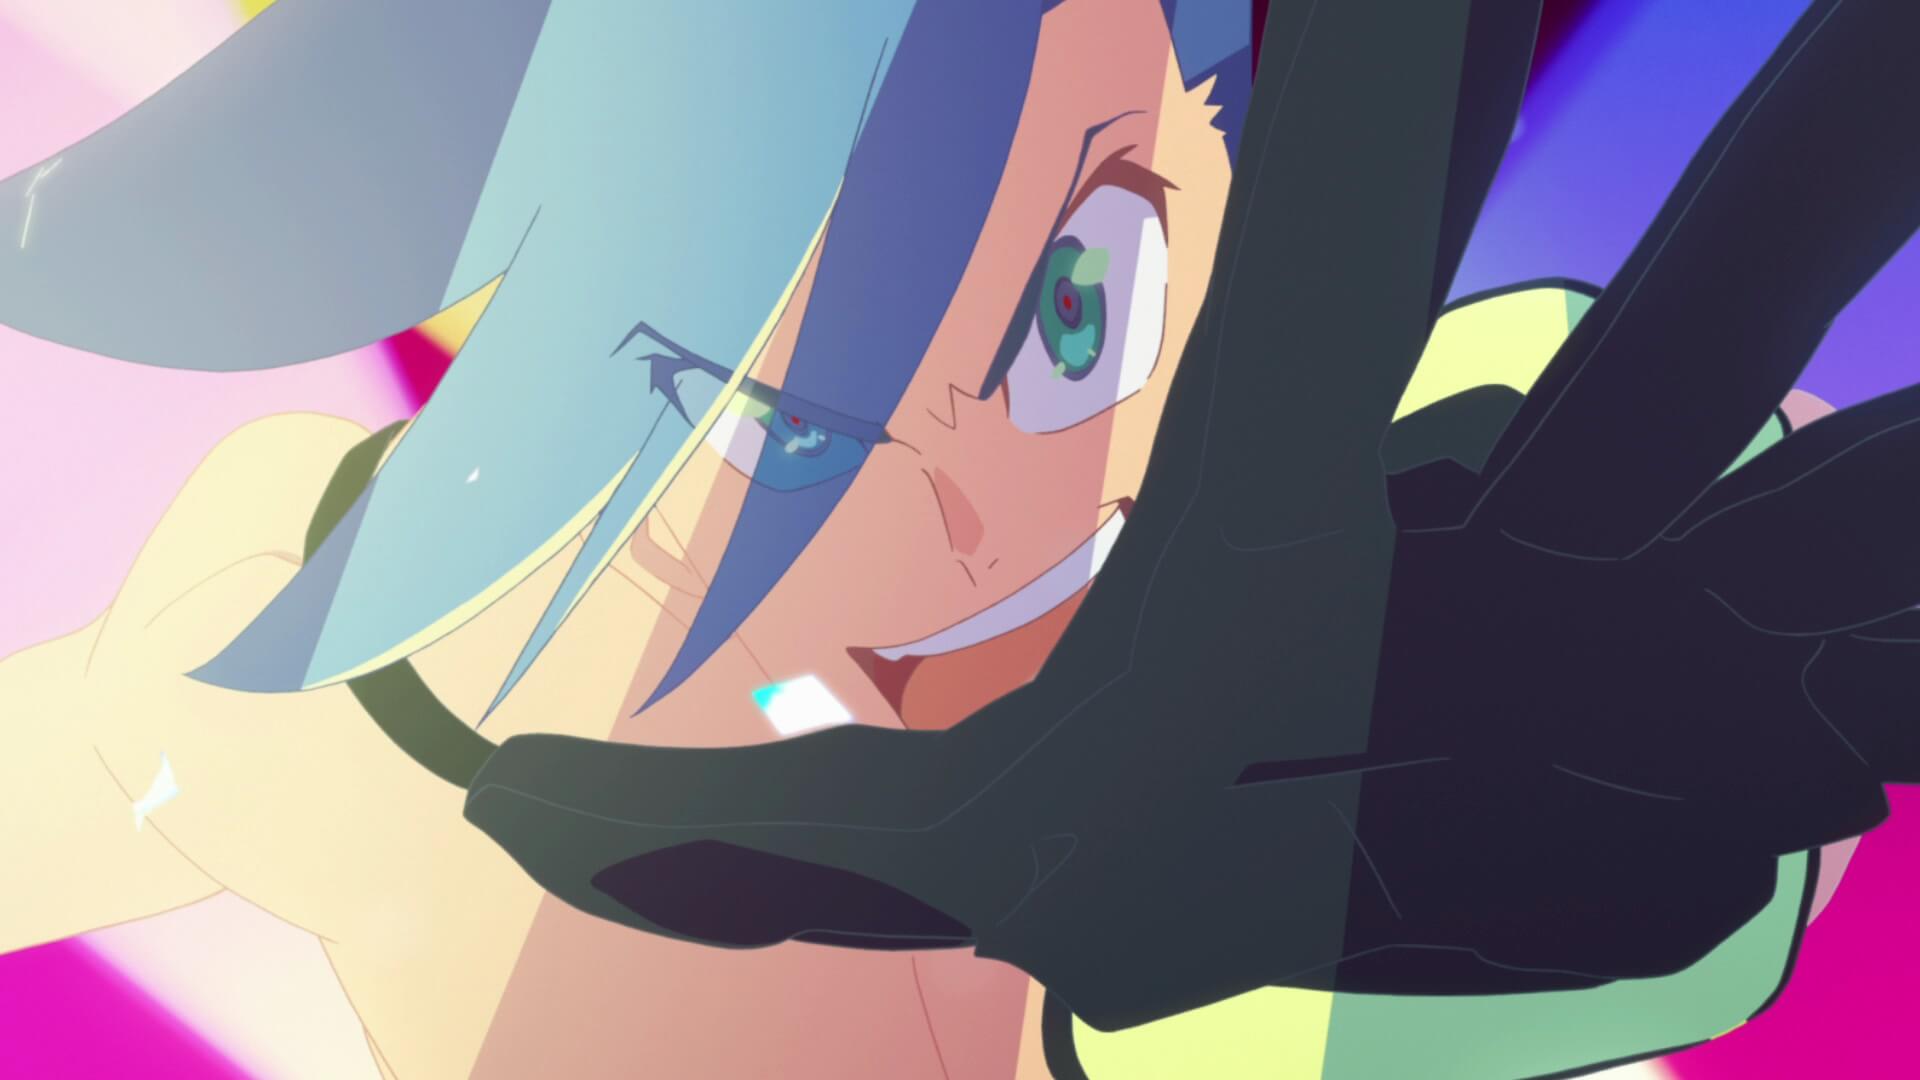 1920x1080 New Released For Anime Movie Promare Moshi Moshi